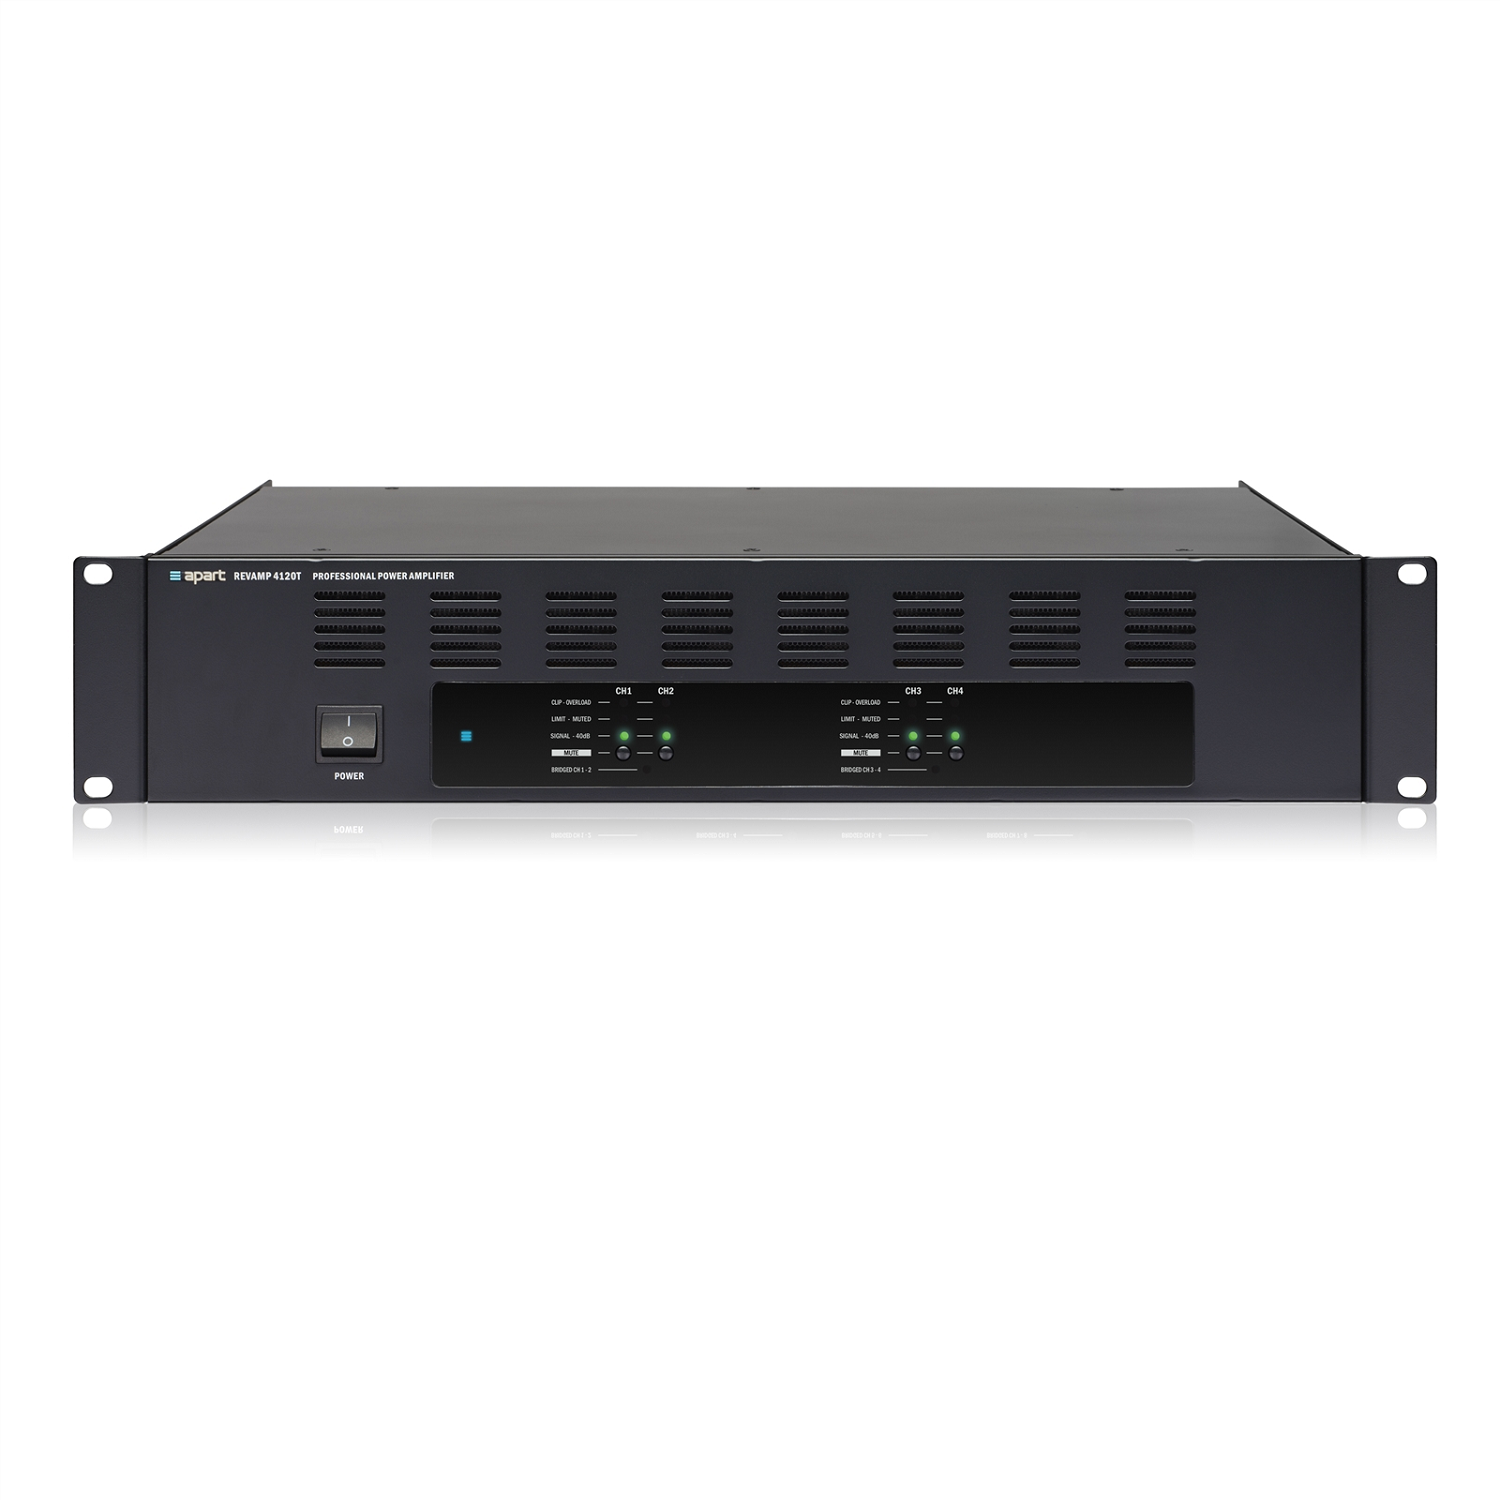 4 Channel class D amplifier 4 x 120 Watts (70/100 Volts or RMS @ 4 Ohms) or in bridge mode 2 x 240 Watts (70/100 Volts or RMS @ 8 Ohms), Combined Convection and Fan Cooling, 2 U, 19&quot; Rackmount , REVAMP4120T , APART